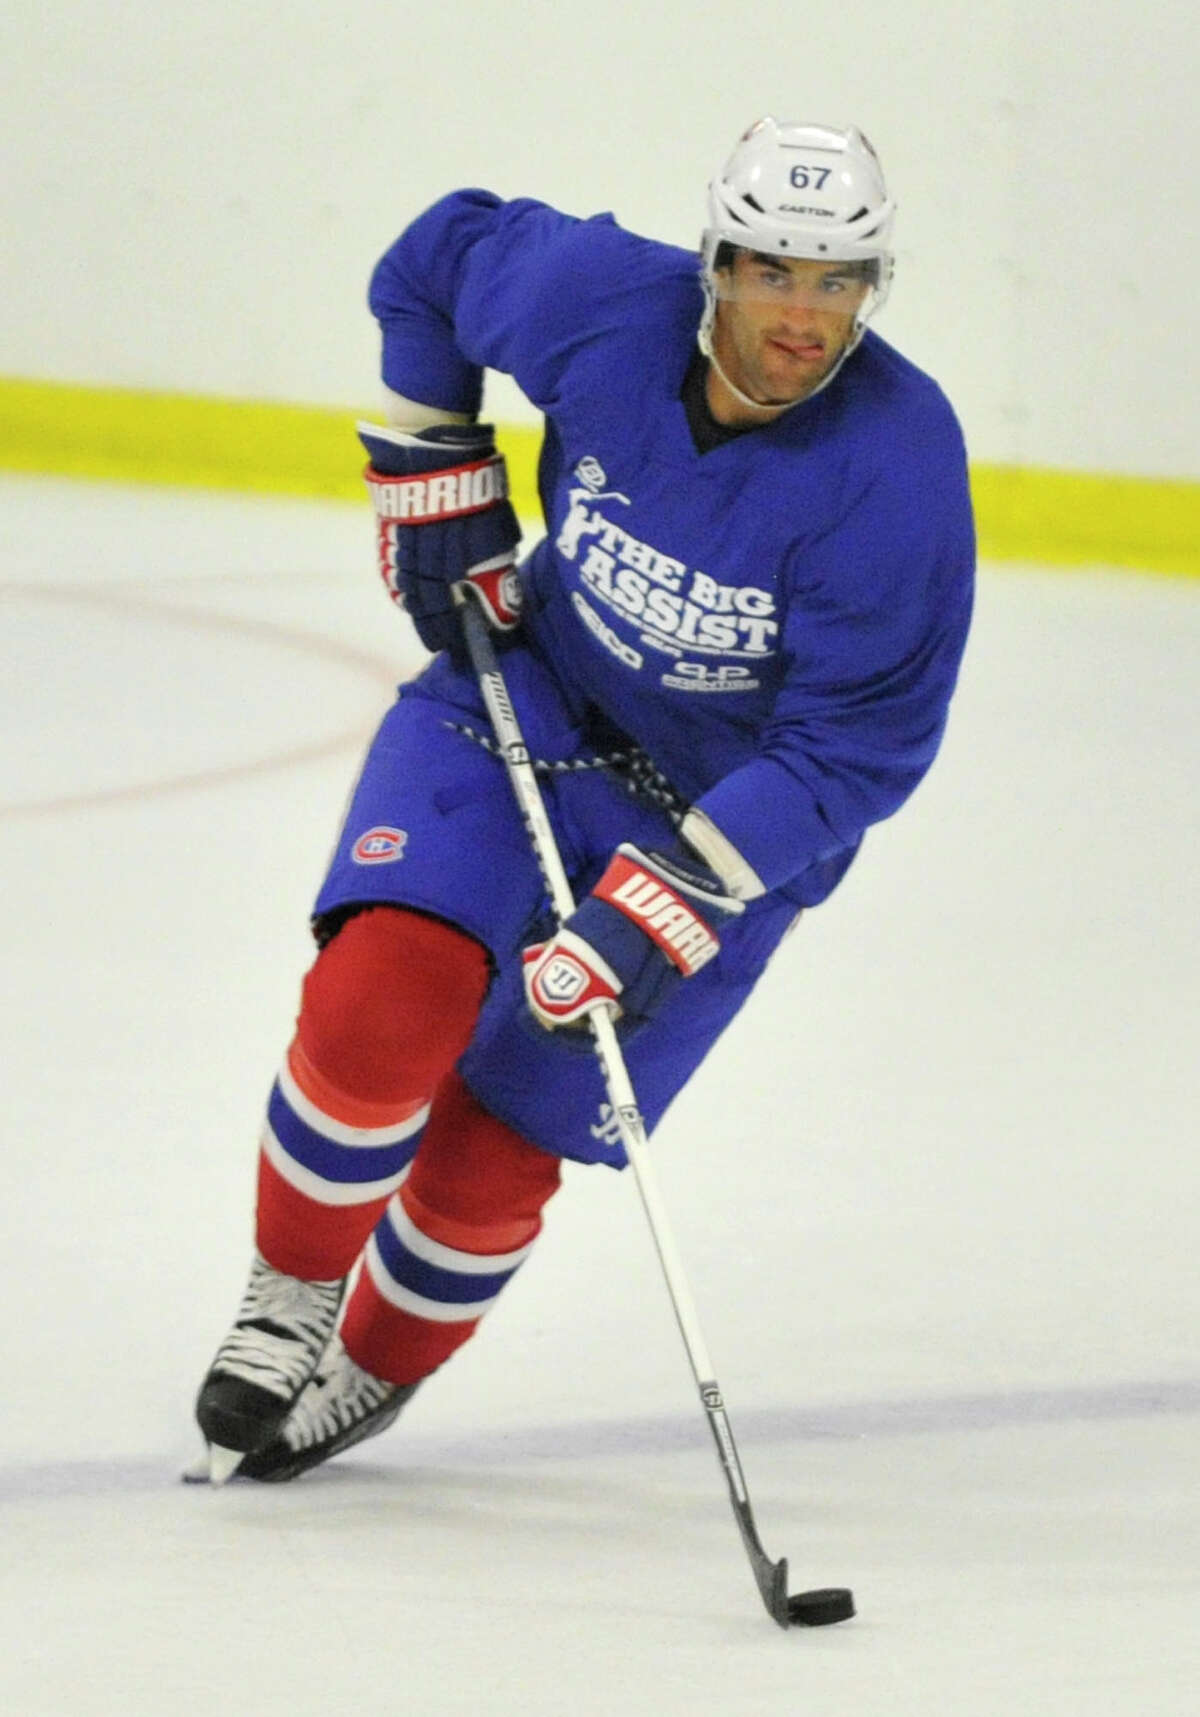 Max Pacioretty, of the Montreal Canadiens, skates with the puck during the Big Assist V charity hockey game at Terry Conners Rink in Stamford on Wednesday, July 10, 2013. Proceeds benefit the Obie Harrington-Howes Foundation.